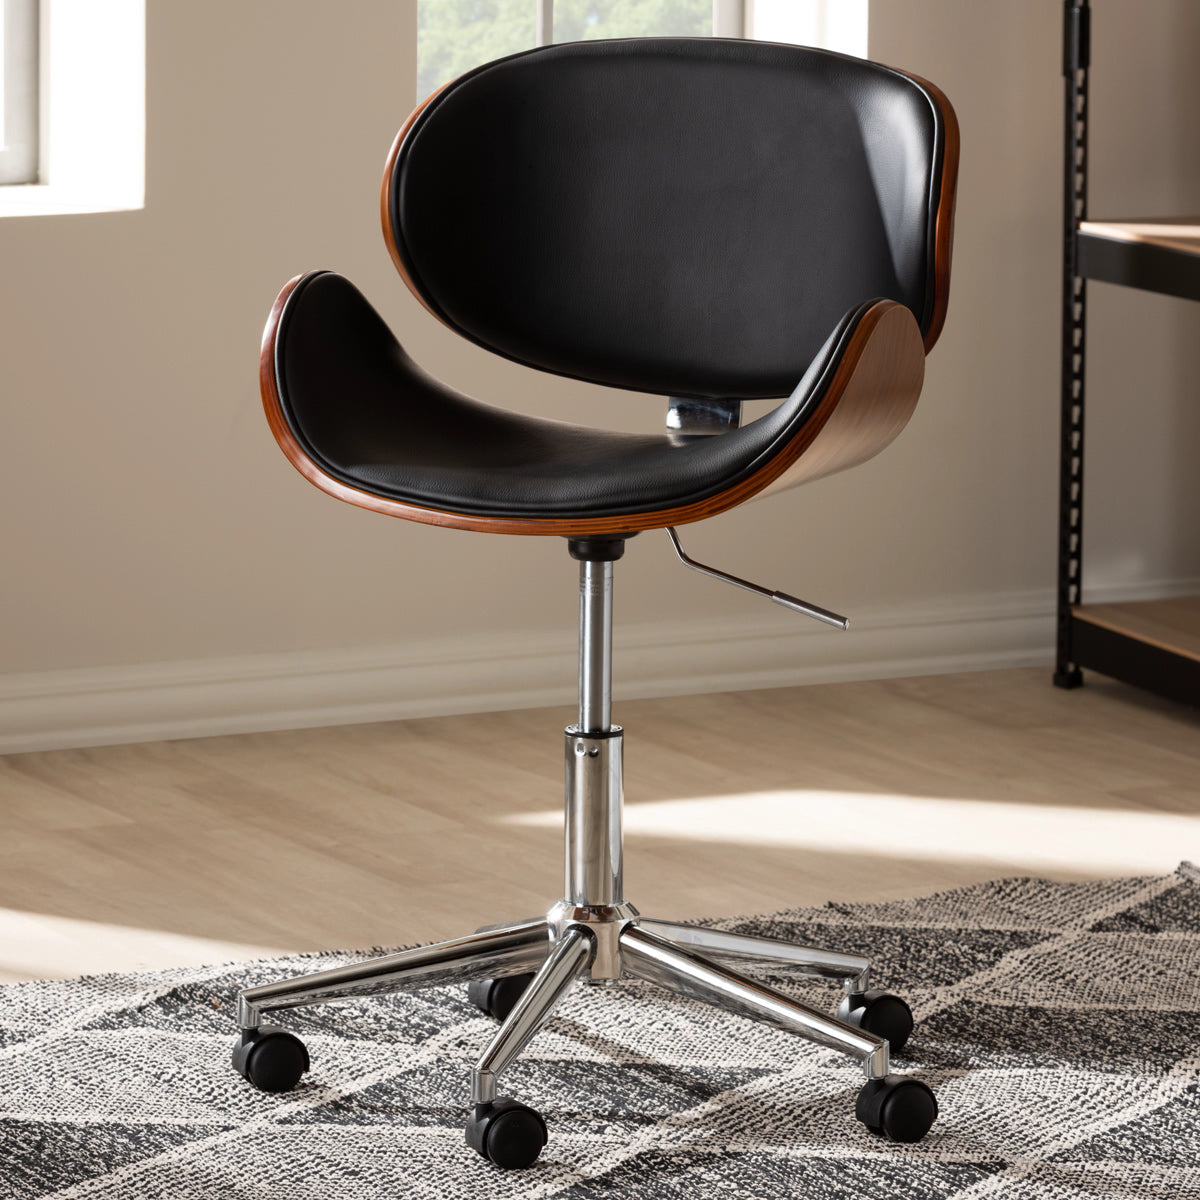 Baxton Studio Ambrosio Modern and Contemporary Black Faux Leather Upholstered Chrome-Finished Metal Adjustable Swivel Office Chair Baxton Studio-office chairs-Minimal And Modern - 8